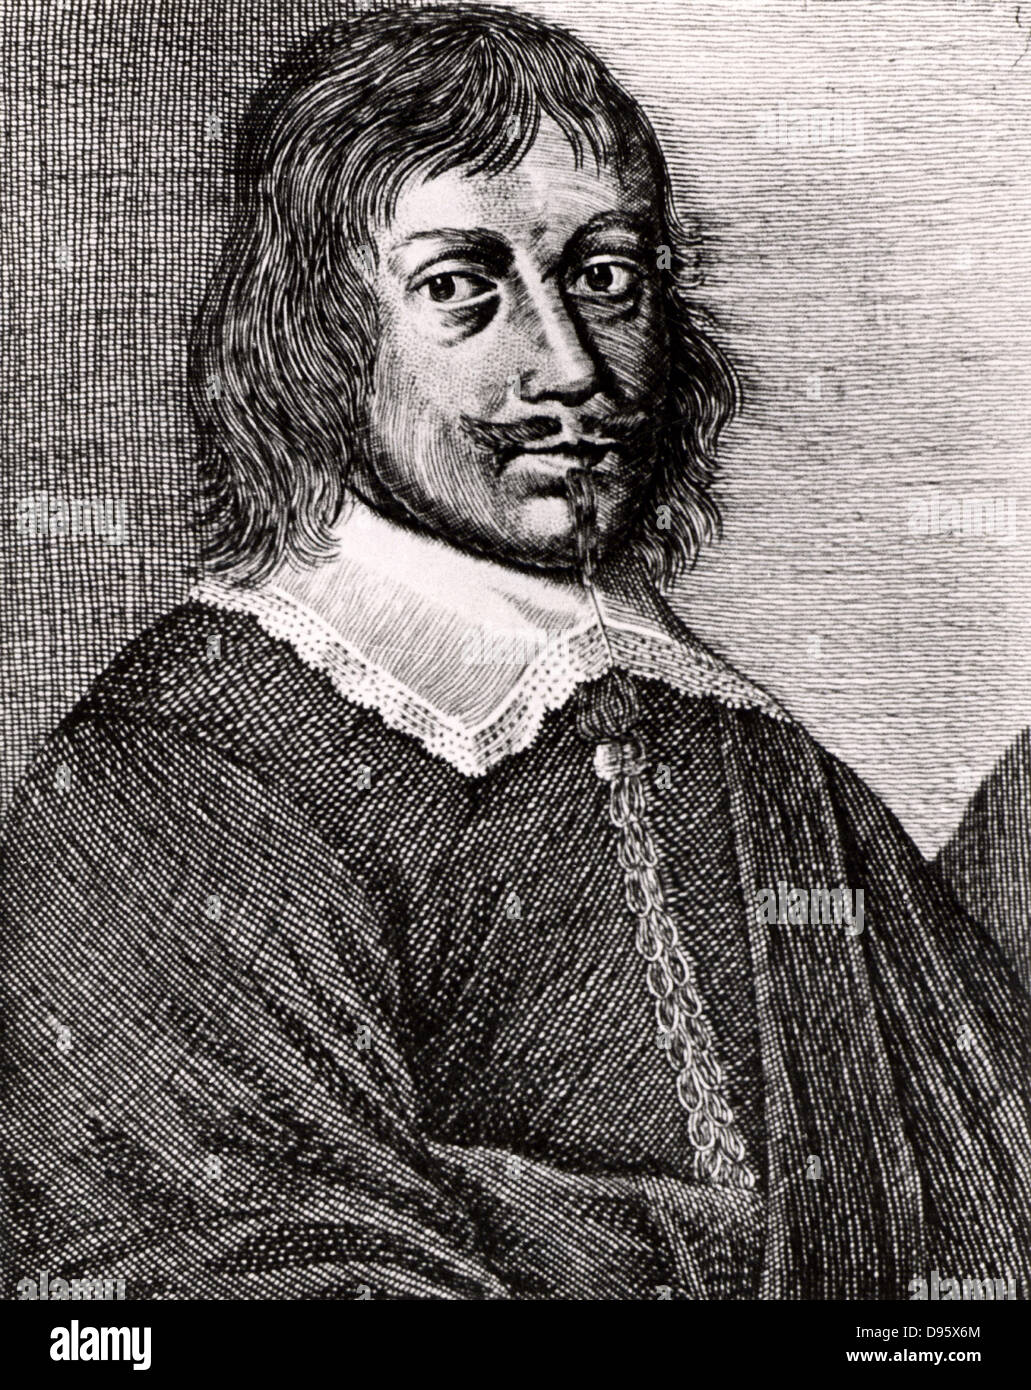 Tobias Andreae (1604-1676) German Calvinist. Professor of philosophy at Groningen University.   Engraving from From 'Icones Virorum' by Friedrich Roth-Scholtz (Nuremberg, 1725). Stock Photo